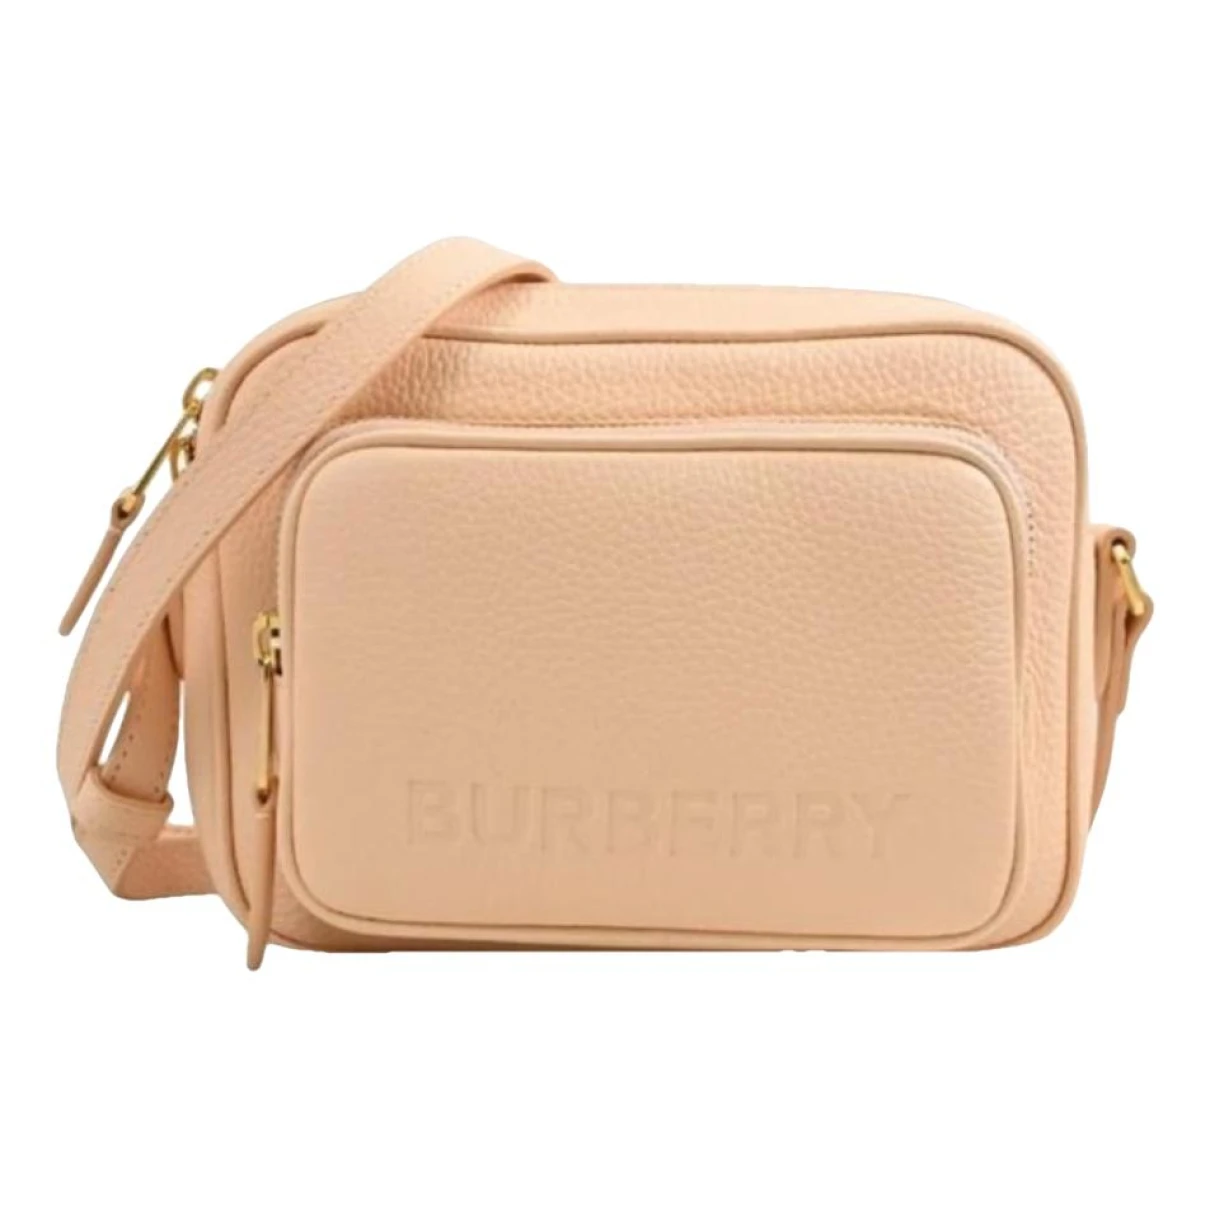 Pre-owned Burberry Leather Handbag In Pink